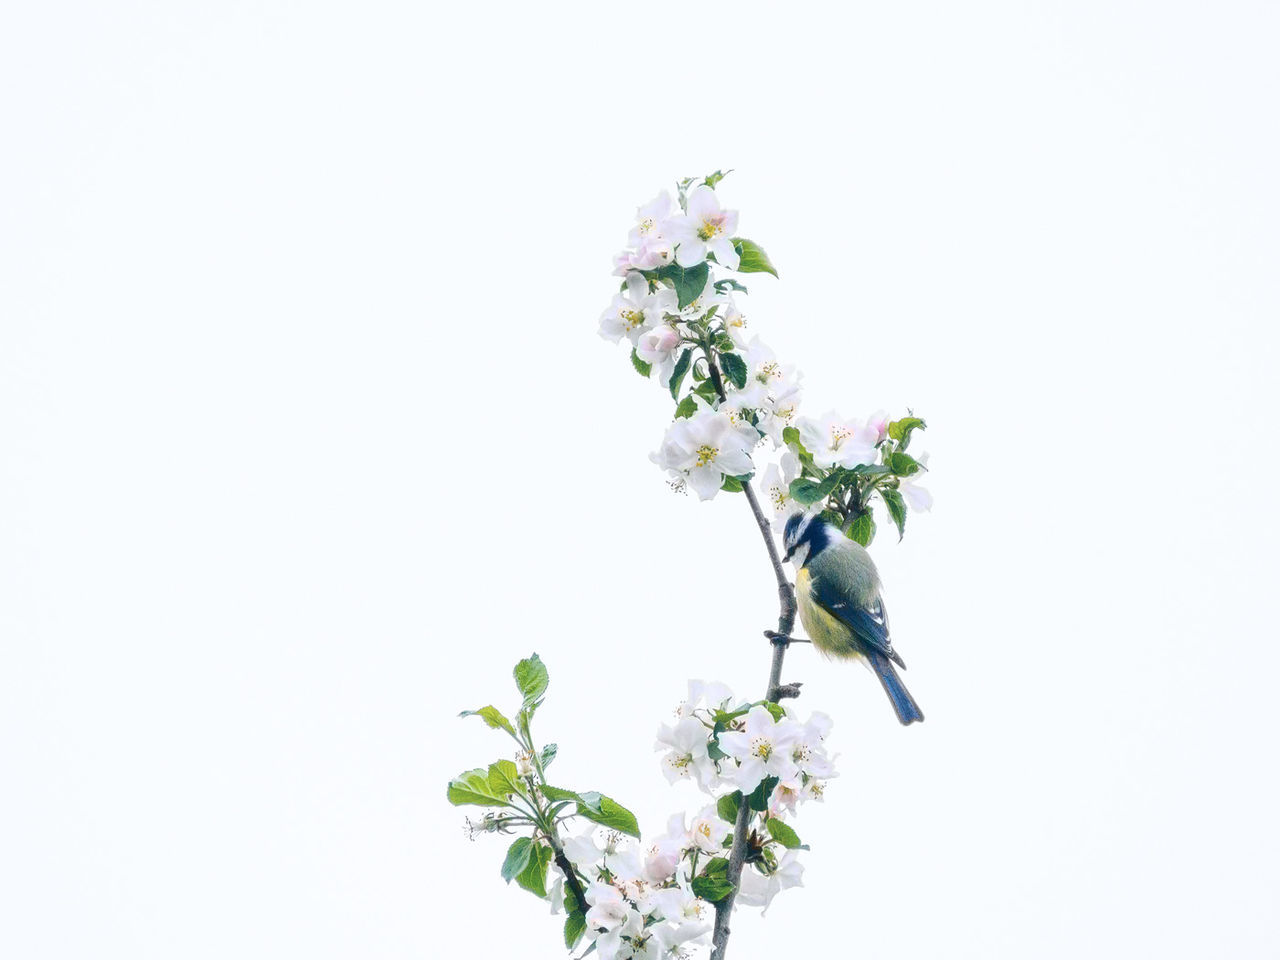 Low angle view of eurasian blue tit on branch with flowers against clear sky